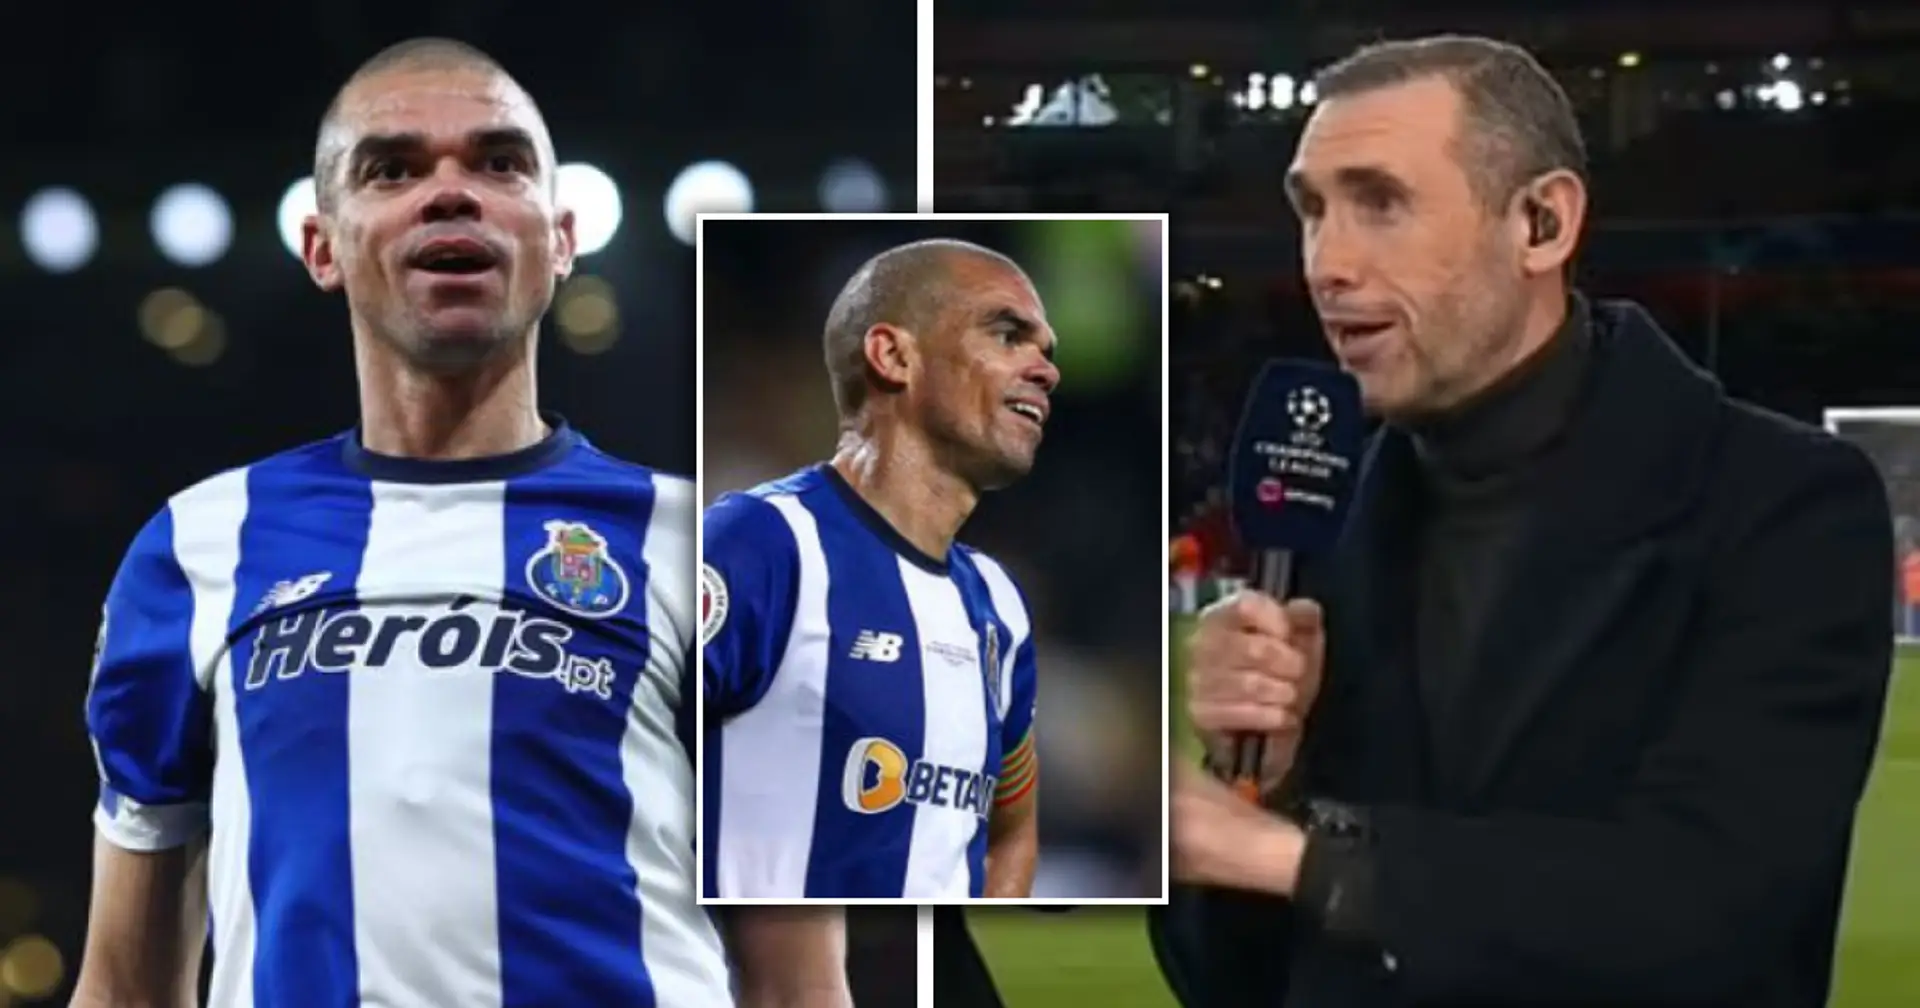 Pepe proves Martin Keown wrong after 'make sure he wants to retire' and 'embarrass him' comments 